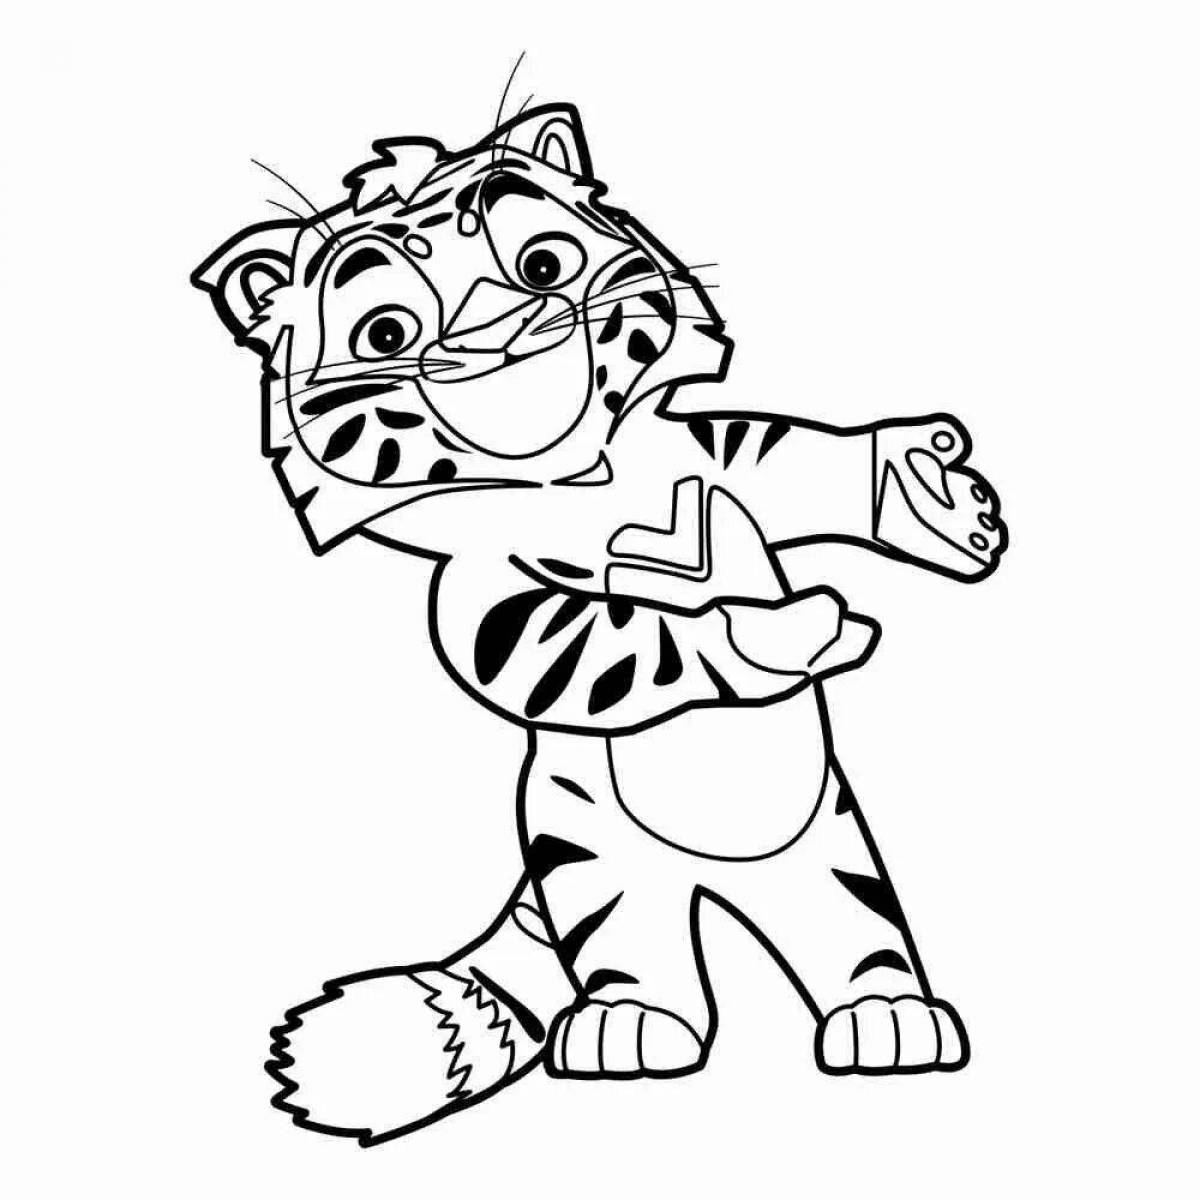 Coloring tiger and lion for kids